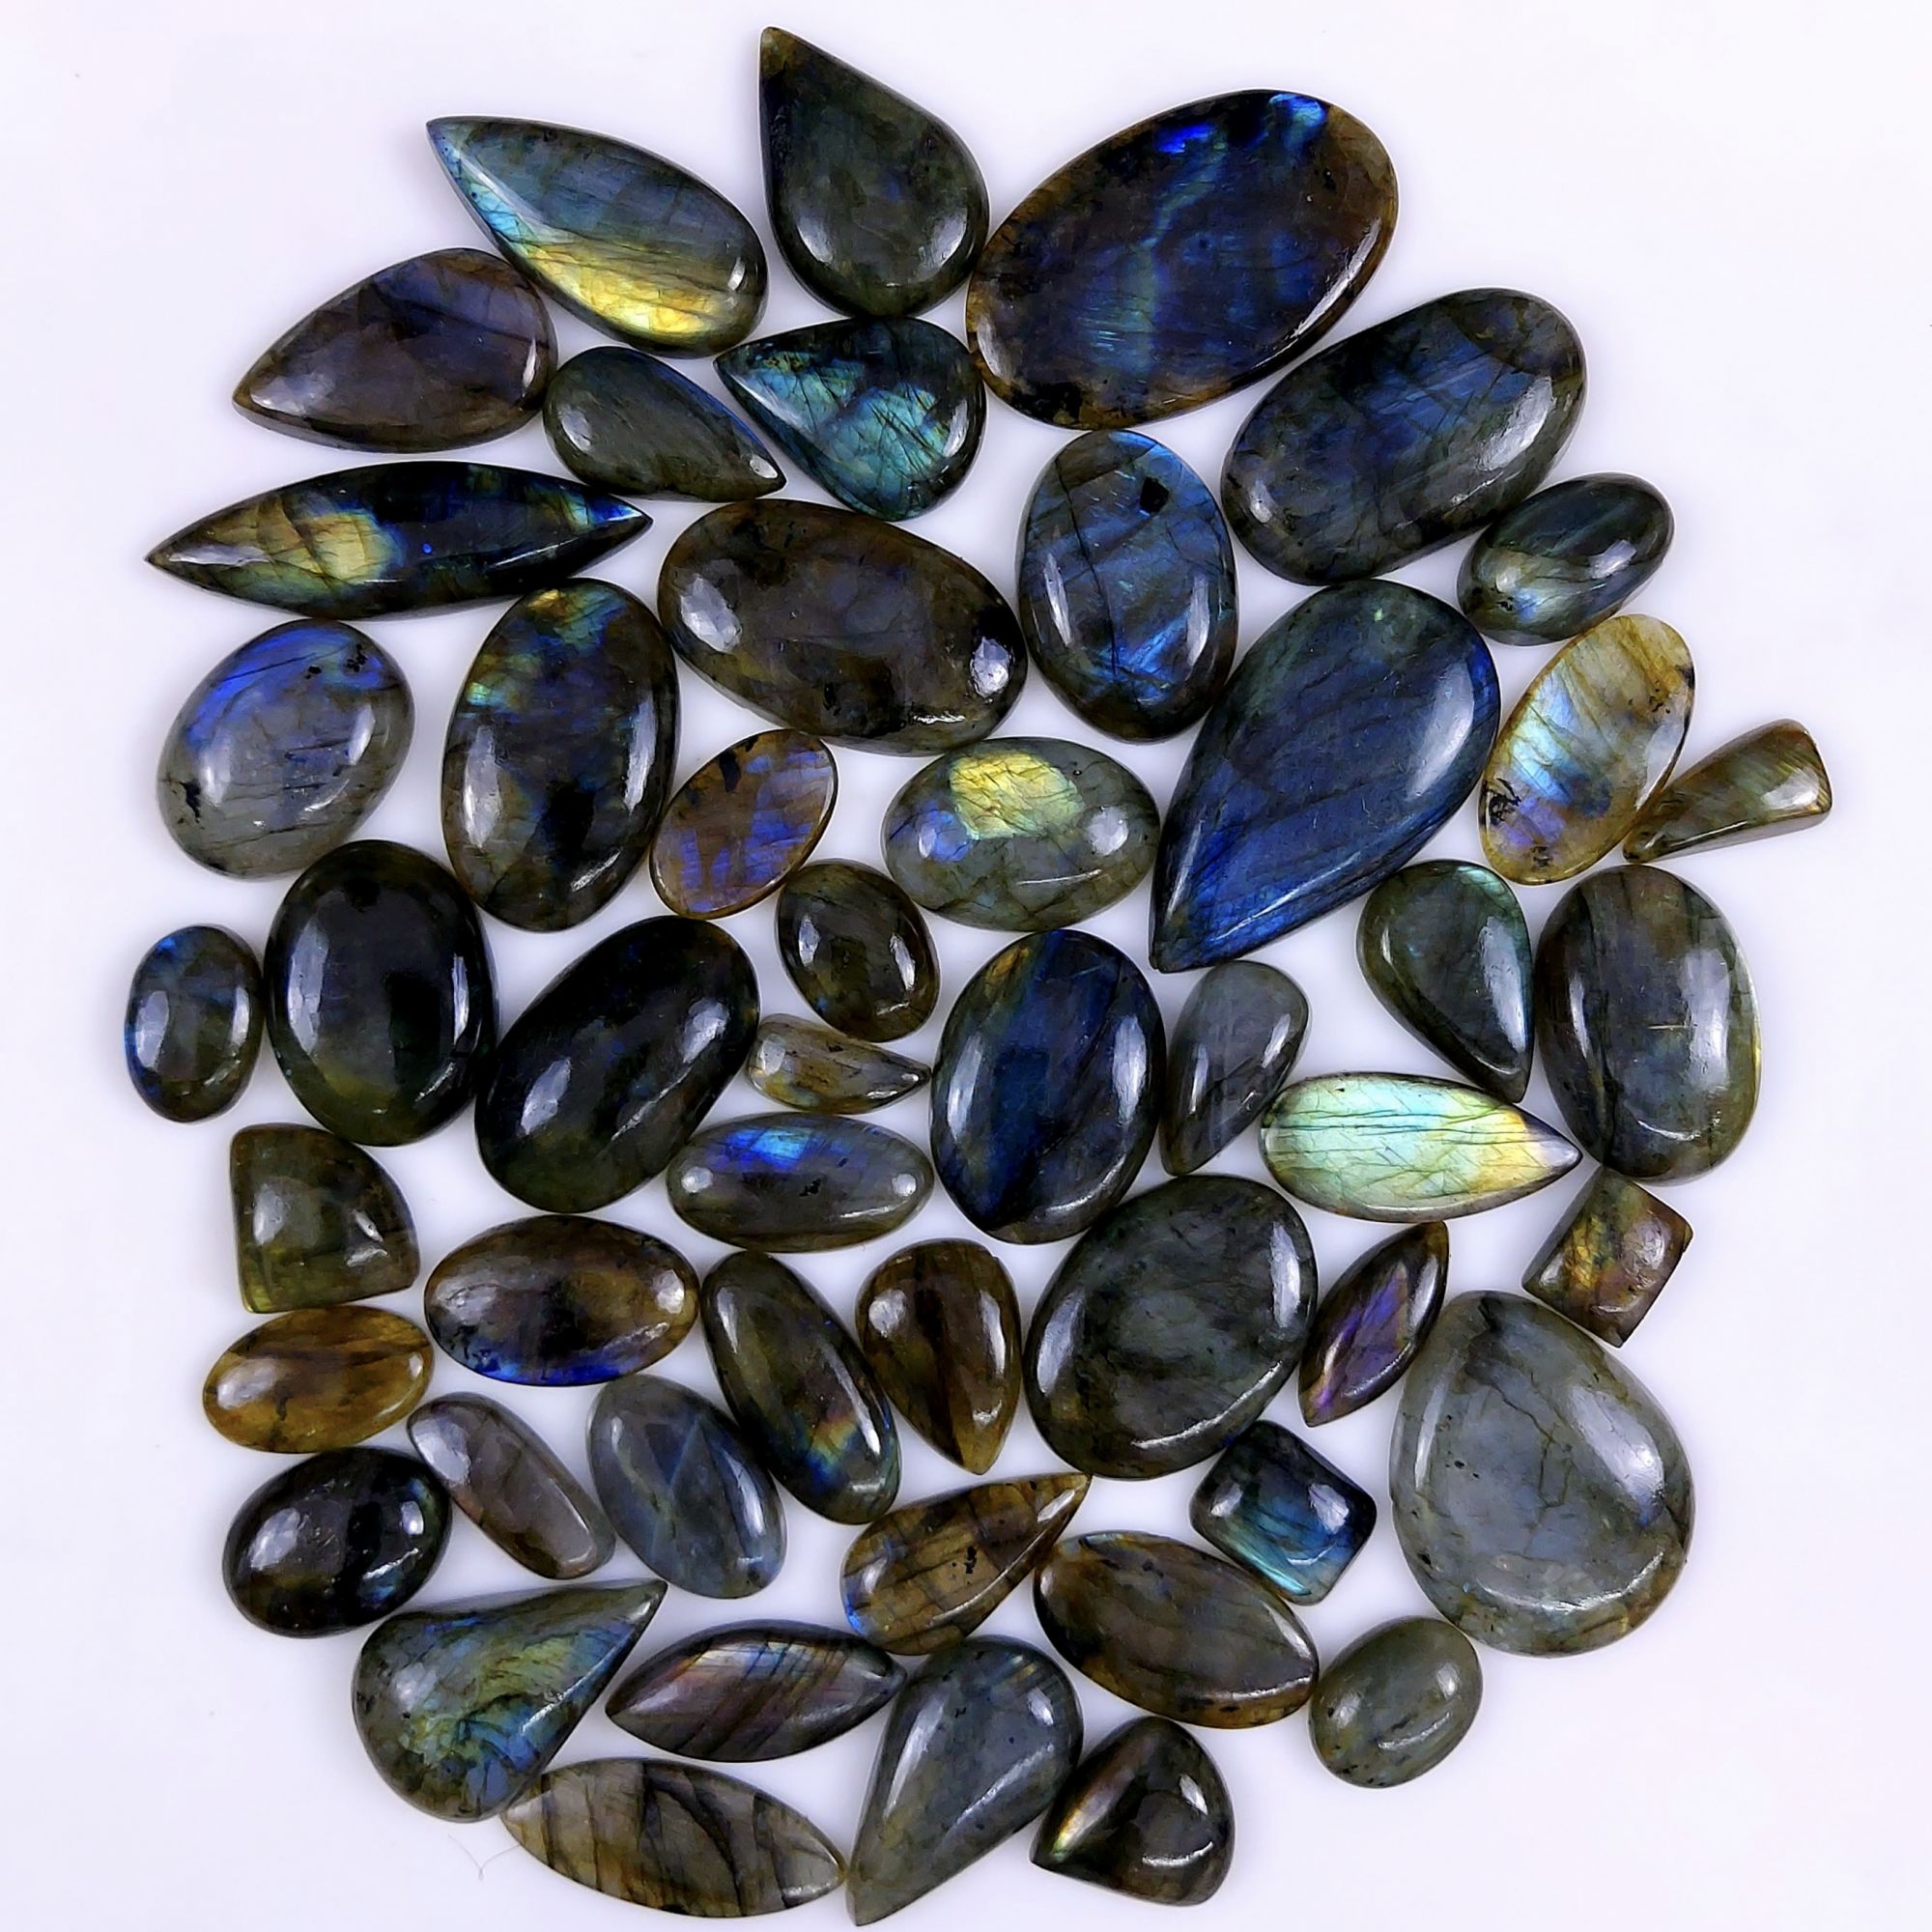 50pc 1628Cts Labradorite Cabochon Multifire Healing Crystal For Jewelry Supplies, Labradorite Necklace Handmade Wire Wrapped Gemstone Pendant 50x28 15x12mm#6269